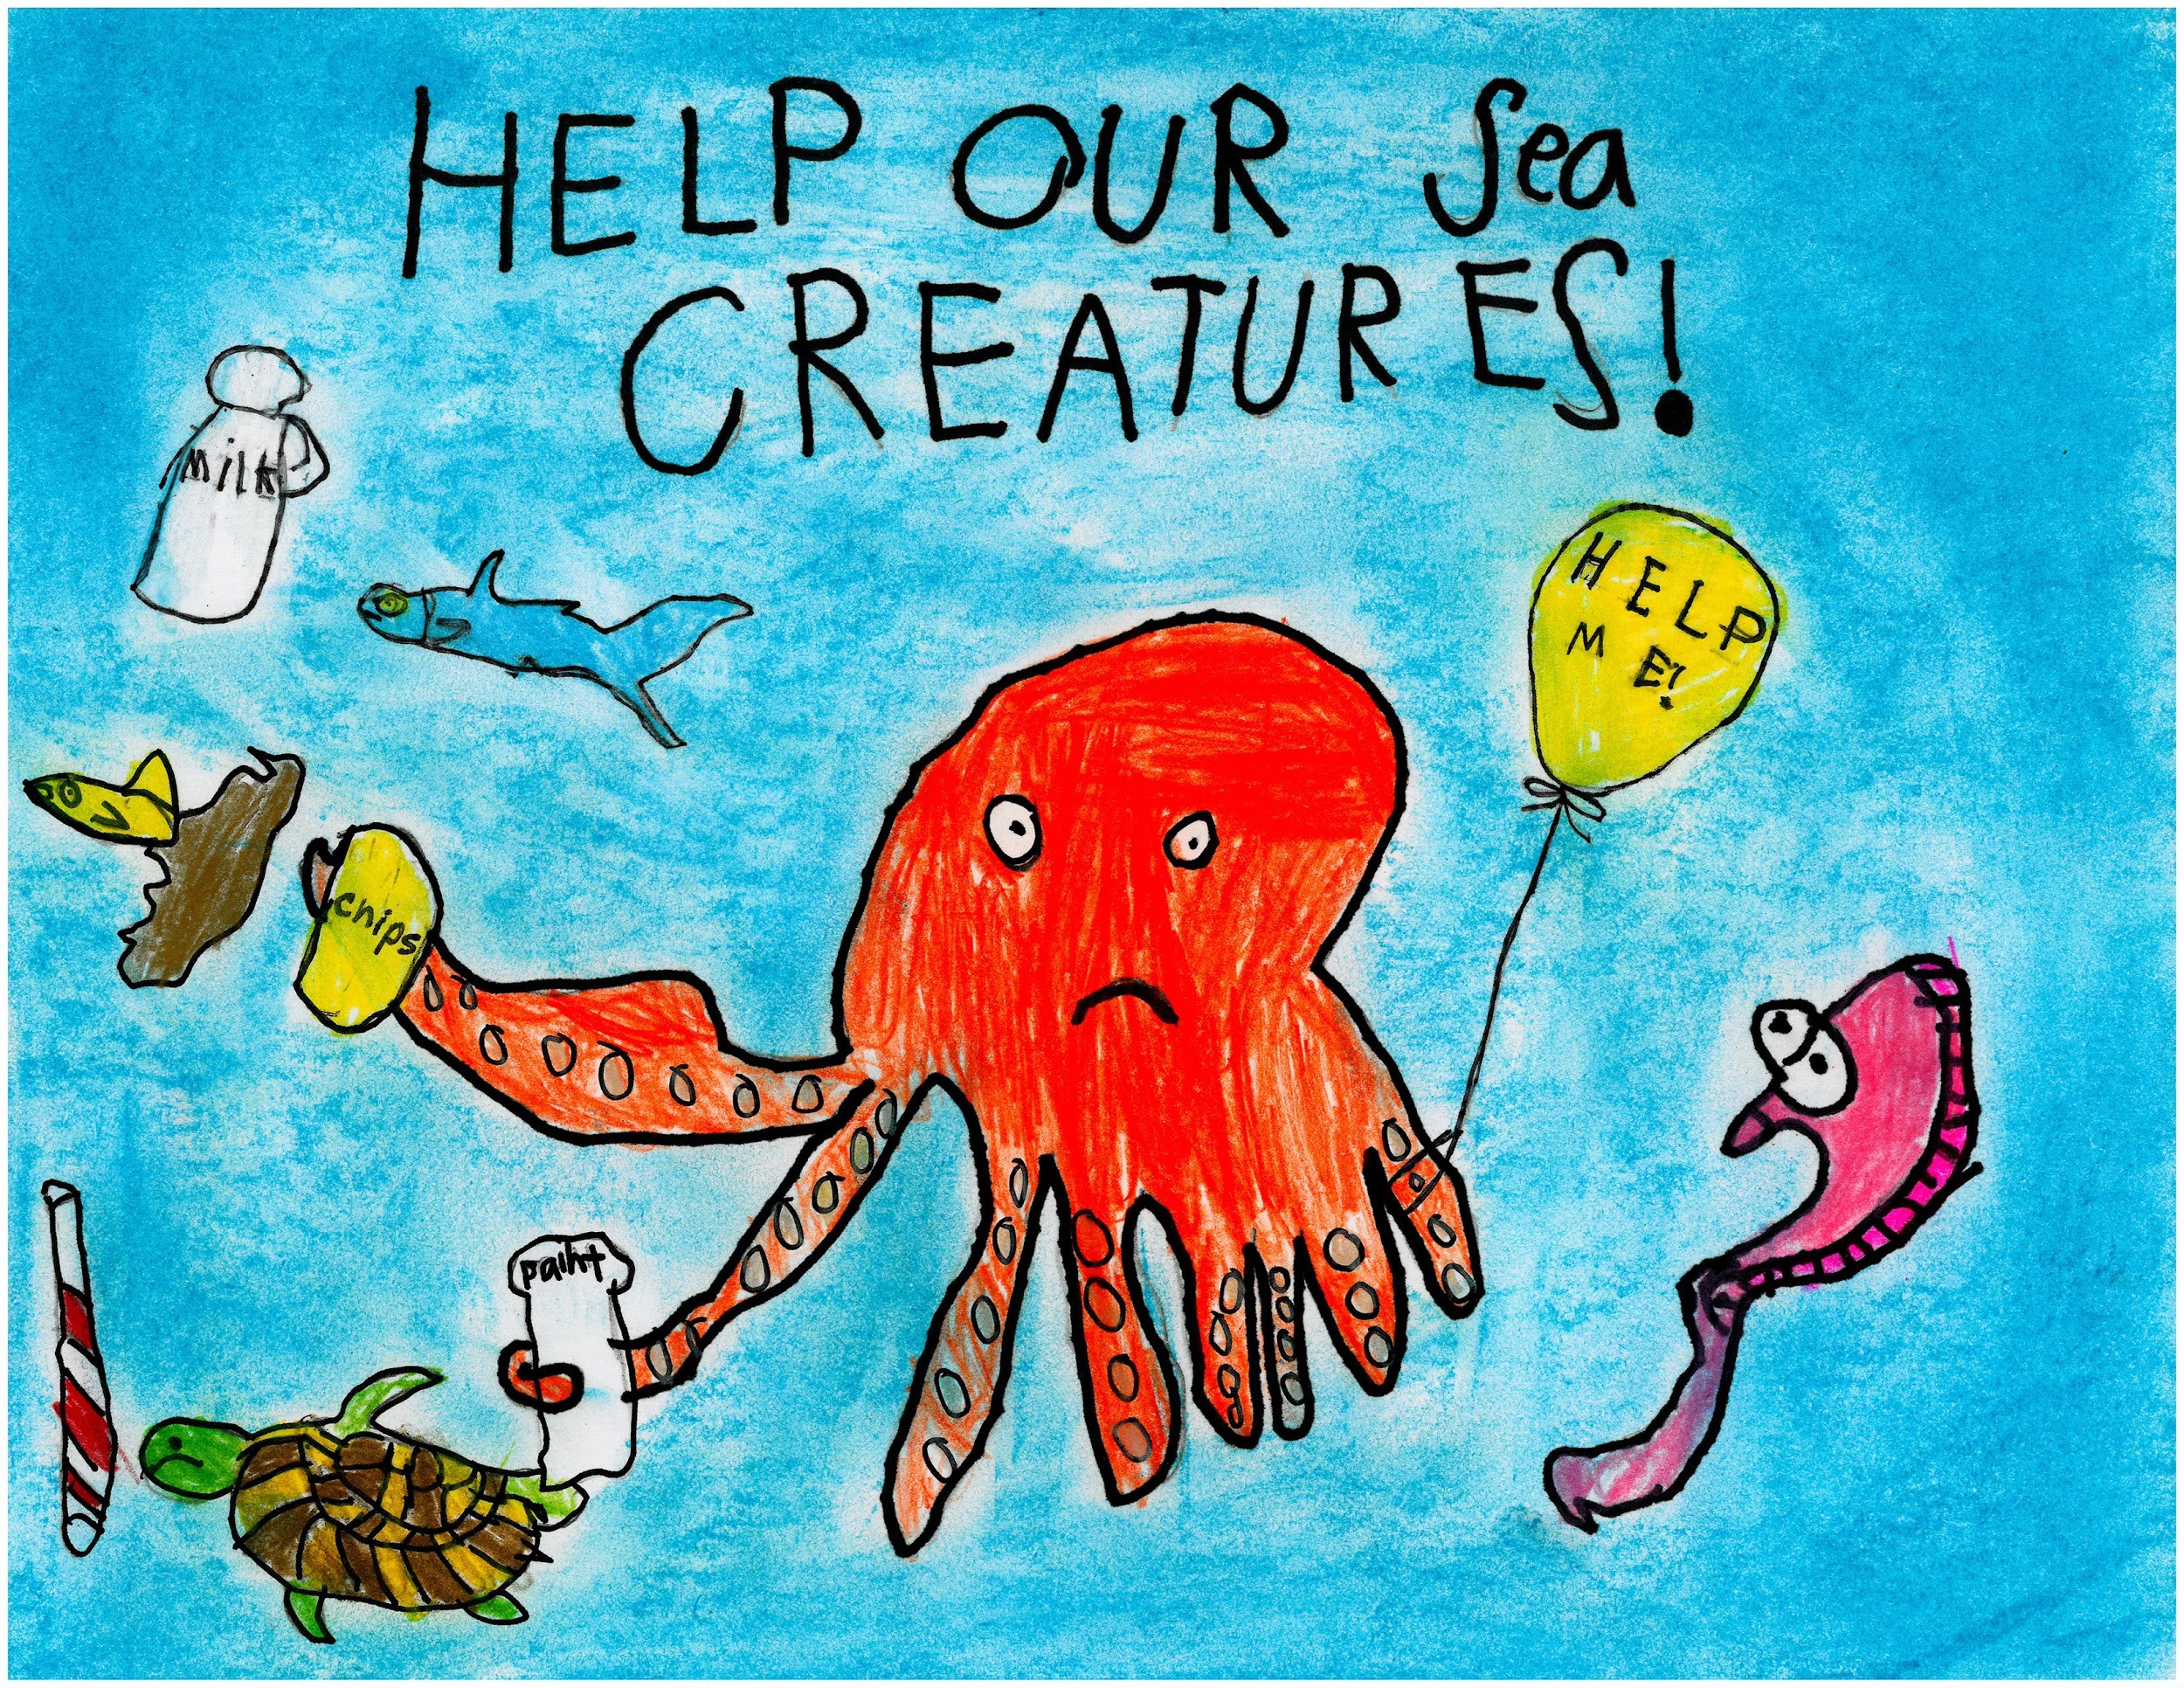 Text: Help our sea creatures! Image: Child’s artwork depicting an octopus, seahorse, and other marine creatures in the ocean. The octopus has a balloon wrapped around one of it's arms and the balloon reads, "Help me!" There is other marine debris, like plastic bottles and straws, floating around the animals.